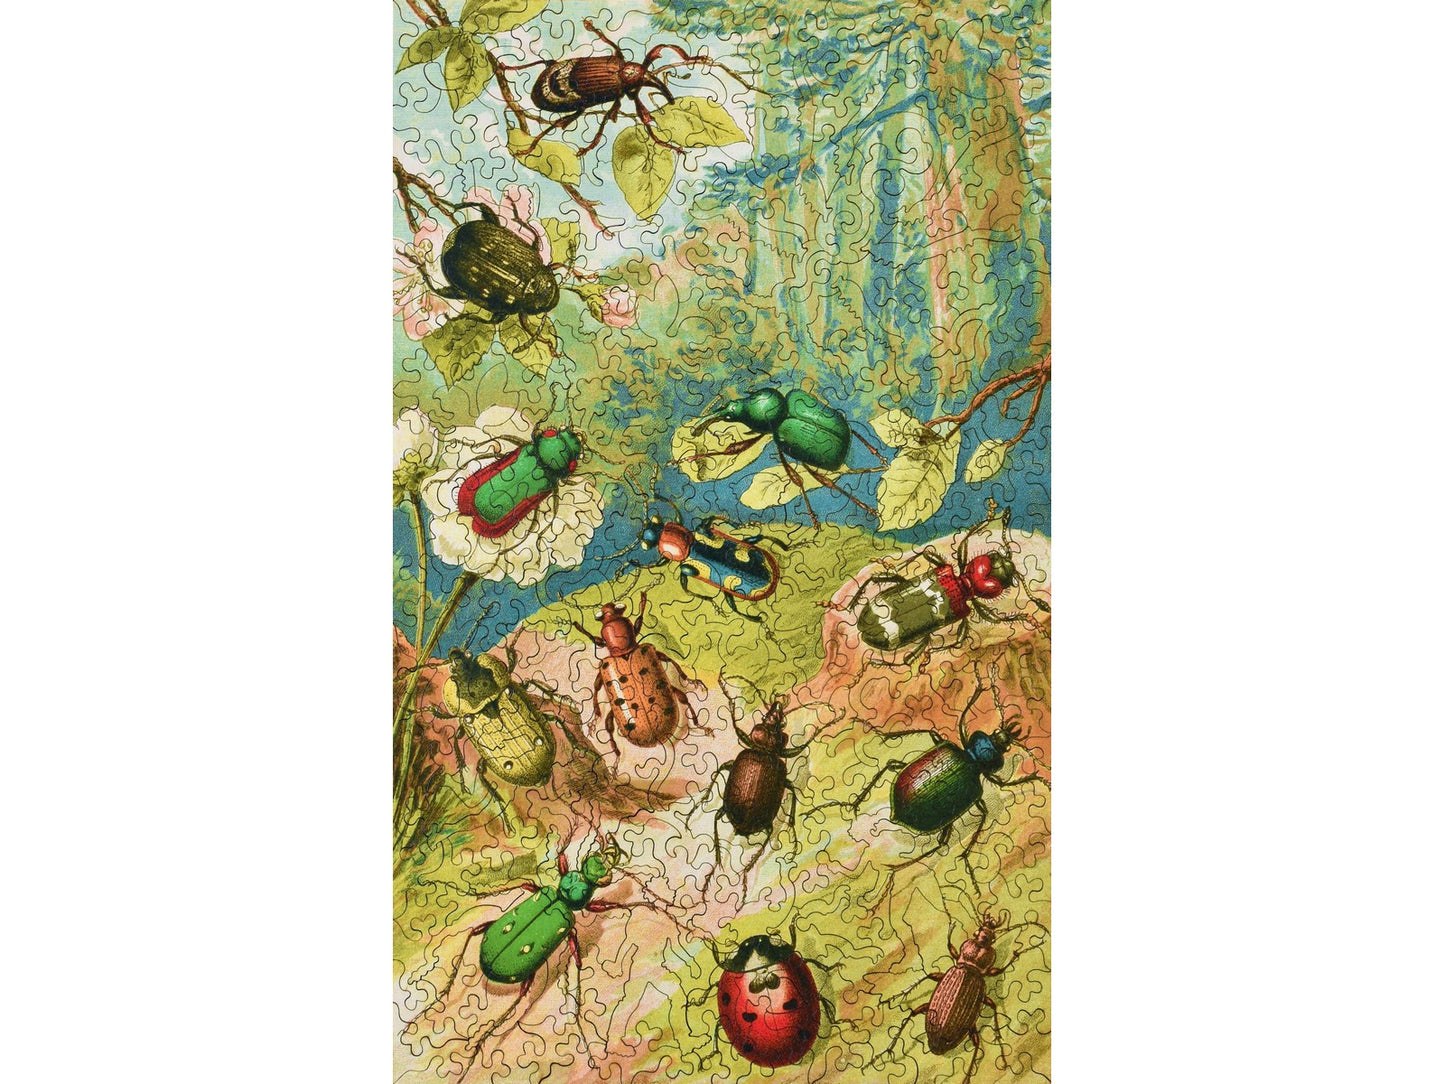 The front of the puzzle, Beetles, which shows different kinds of beetles in a forest.